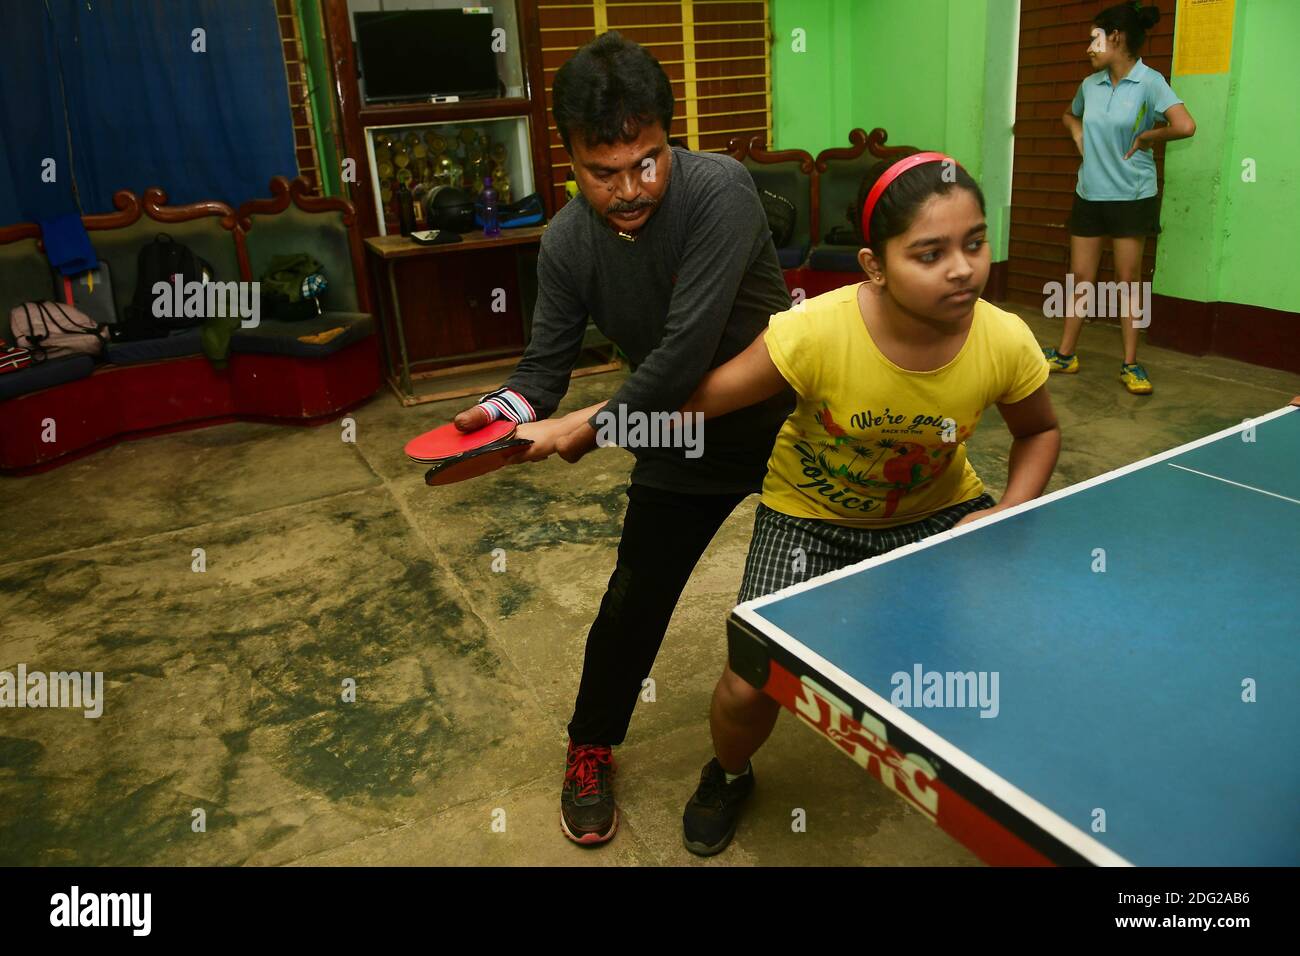 Kajol Dey, a 49 year old disabled table tennis player and coach is seen coaching a young girl at his coaching camp on International Day of Persons with Disabilities (IDPD). Agartala, Tripura, India. Stock Photo